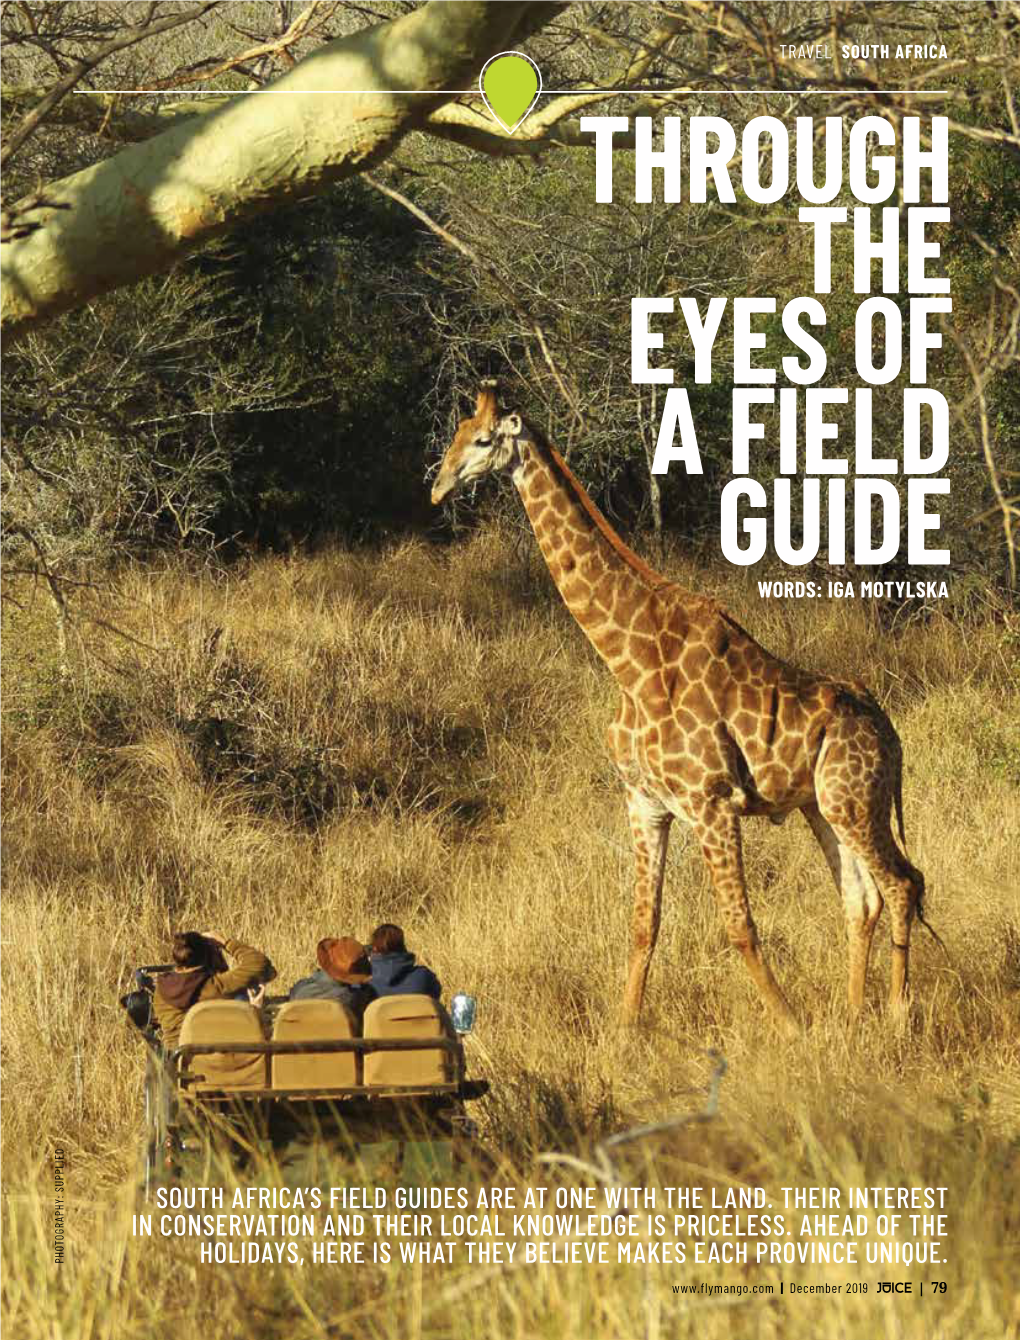 South Africa's Field Guides Are at One with the Land